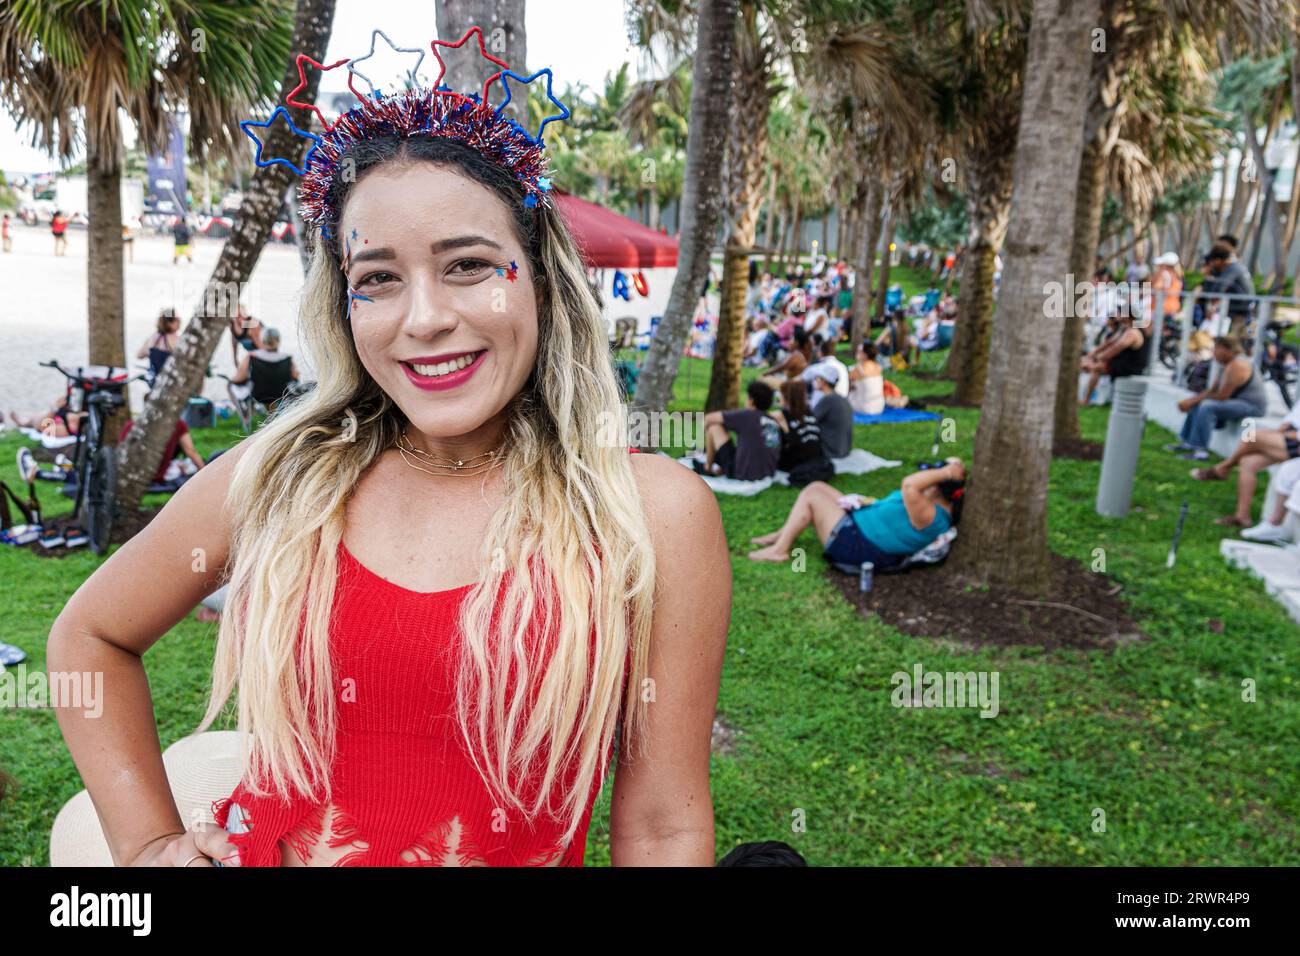 Miami Beach Florida,Ocean Terrace,Fourth 4th of July Independence Day event celebration activity,wearing patriotic hairband,woman women lady female,ad Stock Photo